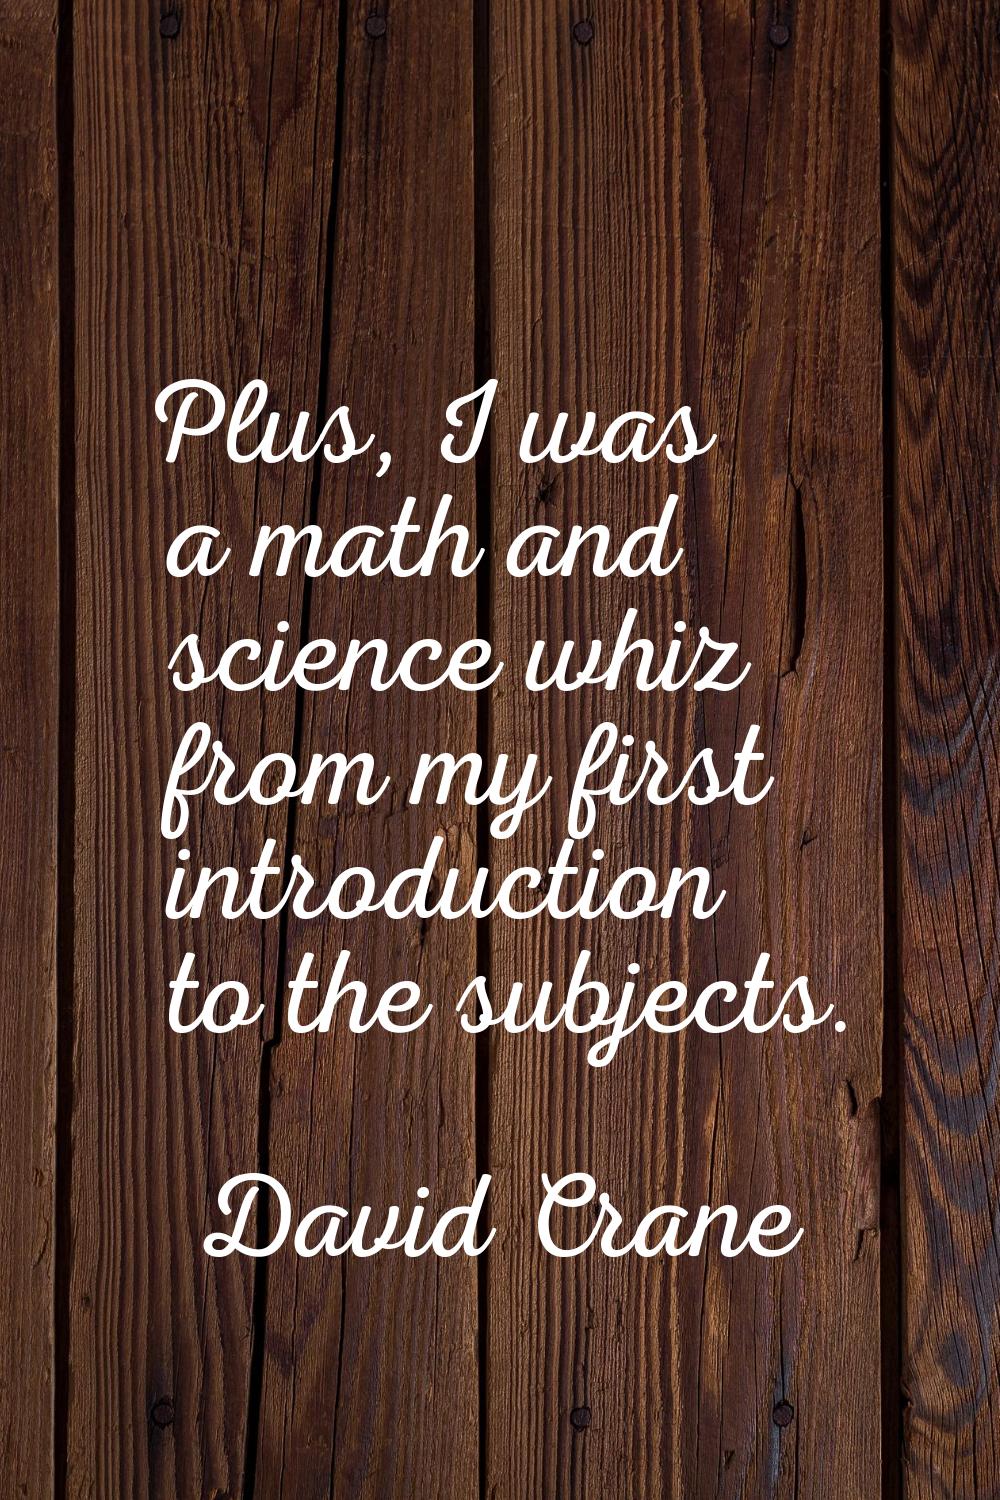 Plus, I was a math and science whiz from my first introduction to the subjects.